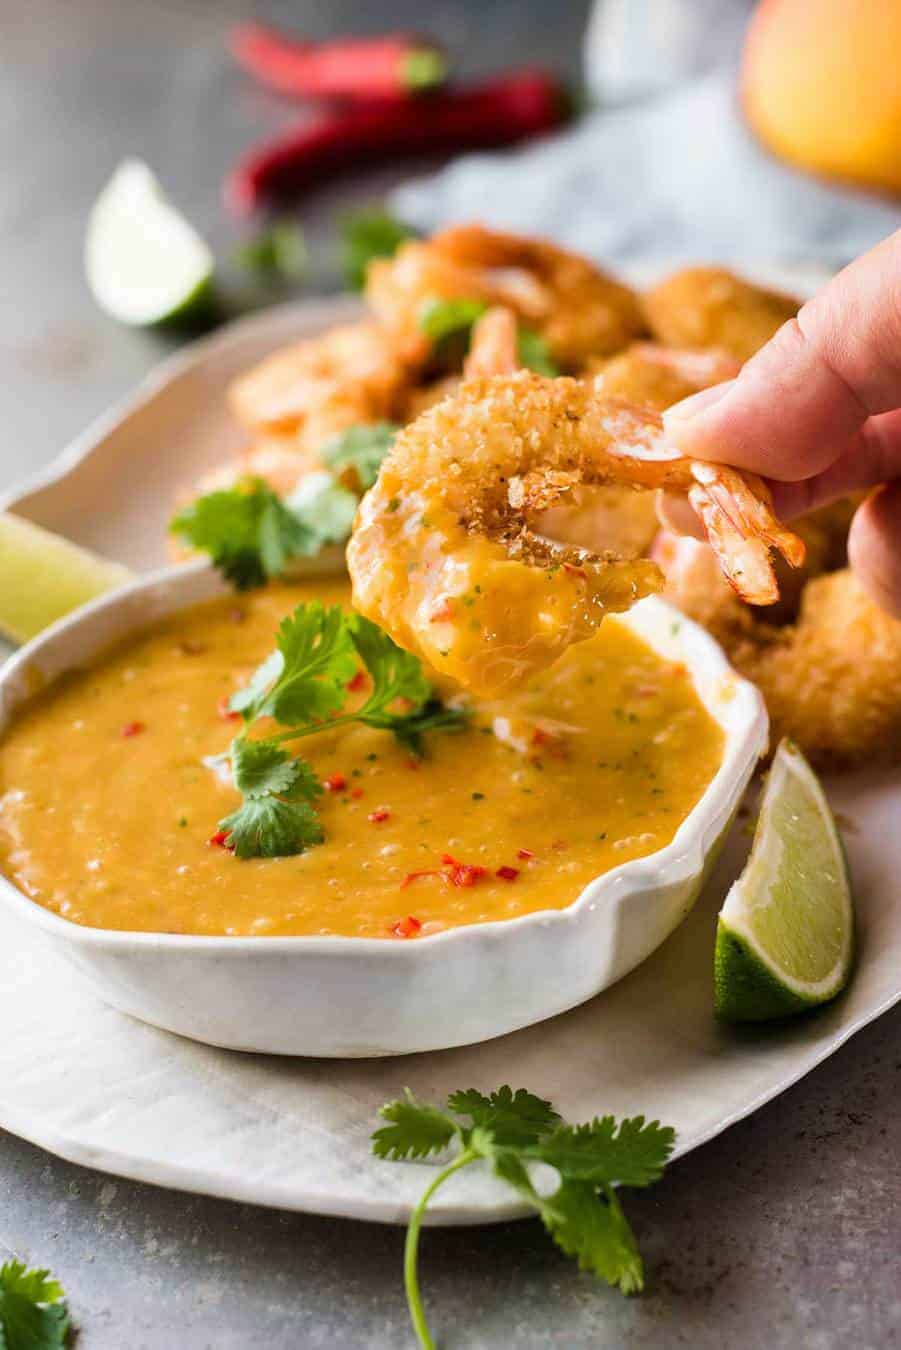 Coconut Shrimp / Prawns with Spicy Thai Mango Sauce - Crunchy shrimp / prawns with a Thai Mango Sauce that's so good you will want to put it on everything!